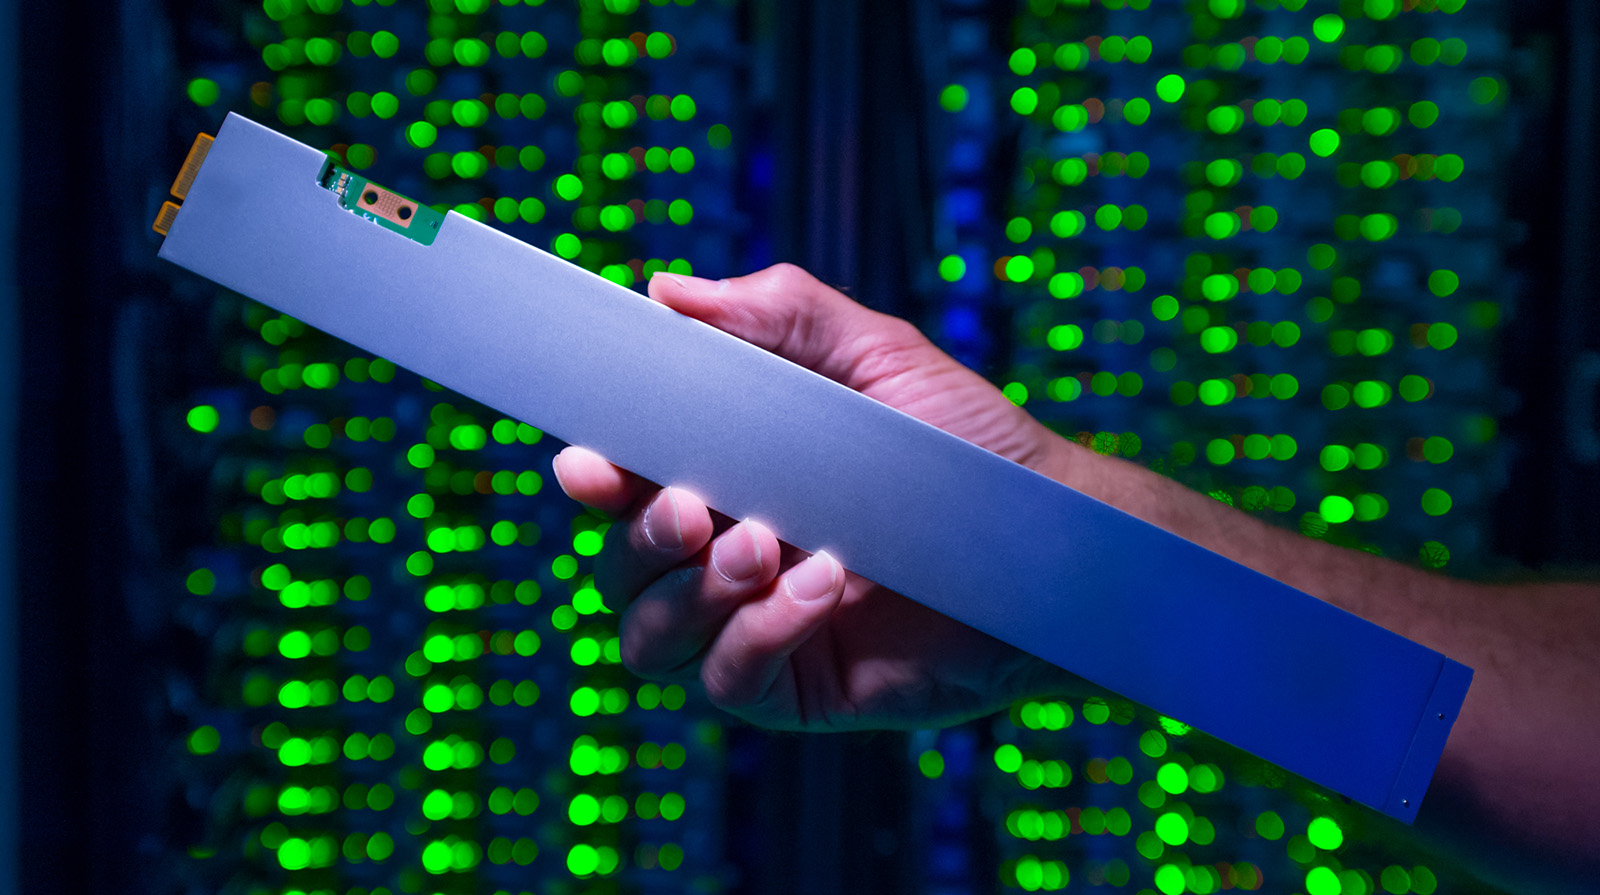 The ruler-shaped Intel SSD DC P4500 can hold up to 32 terabytes. It draws just one-tenth the power of a traditional spinning hard drive. (Credit: Walden Kirsch/Intel Corporation)